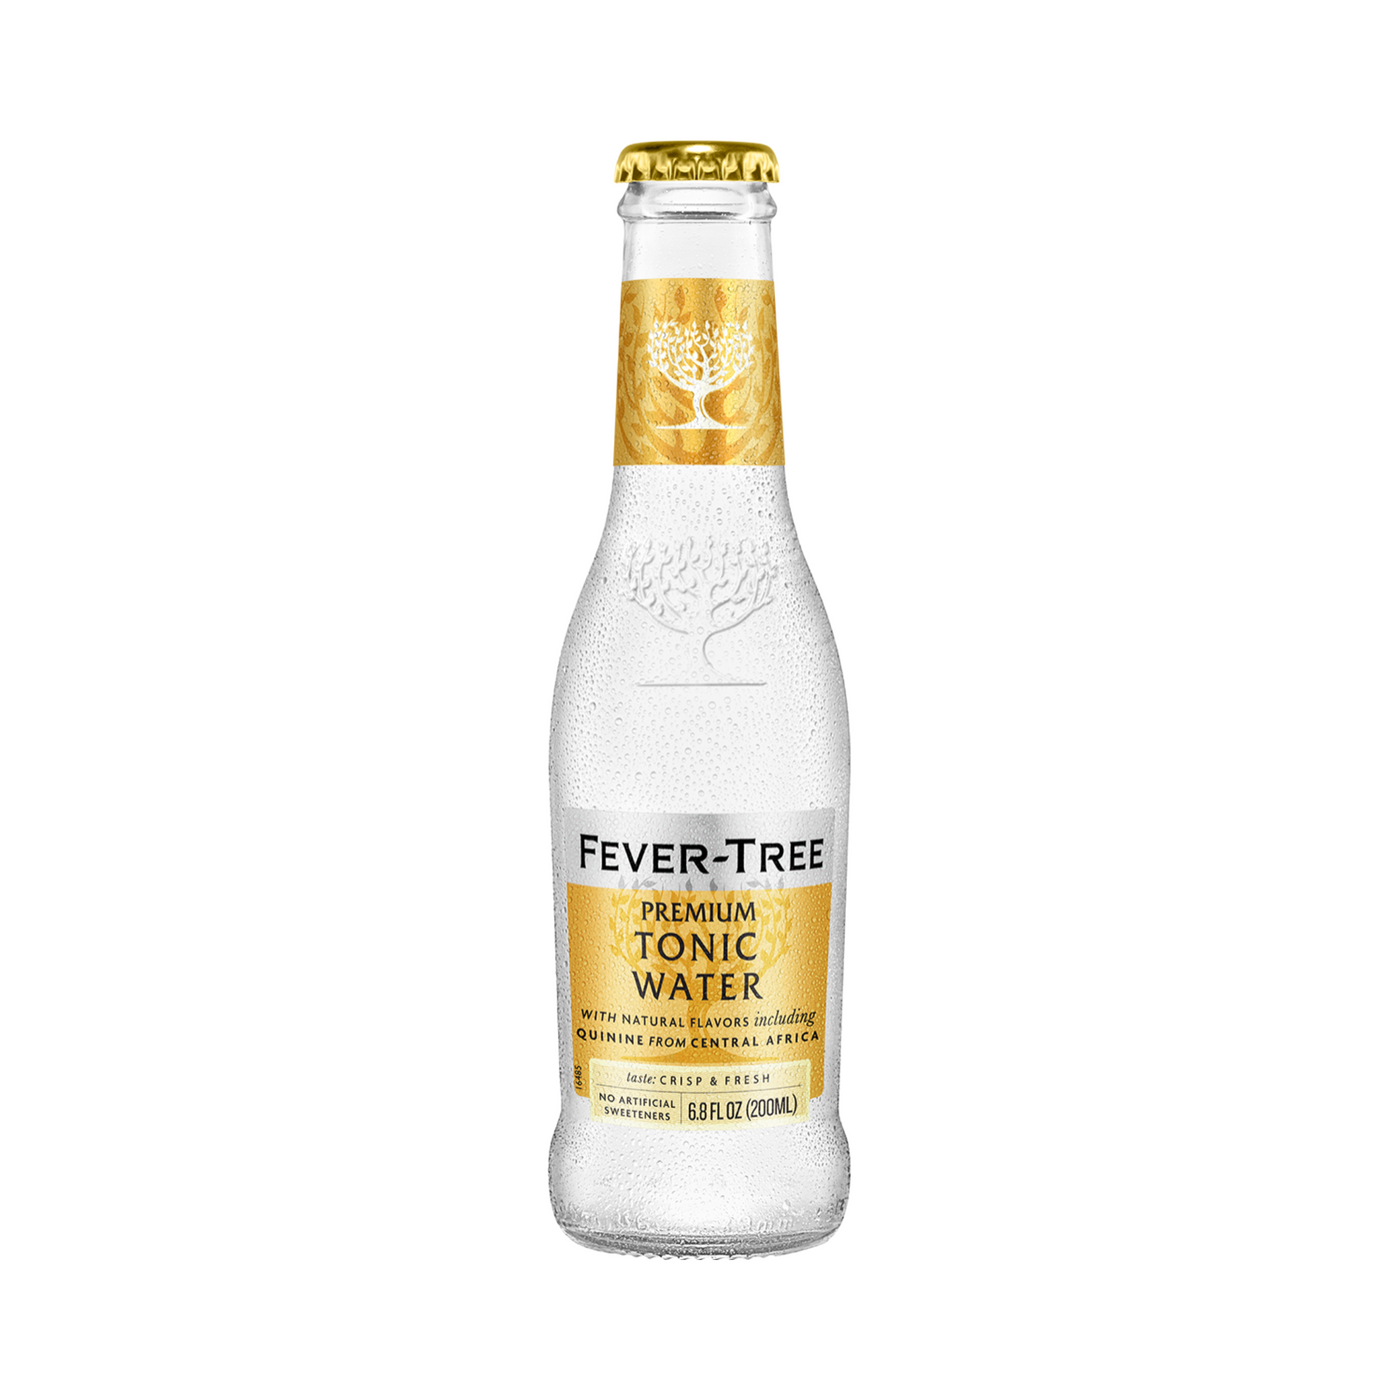 Fever-Tree Indian Tonic Water NRB 20cl case of 24